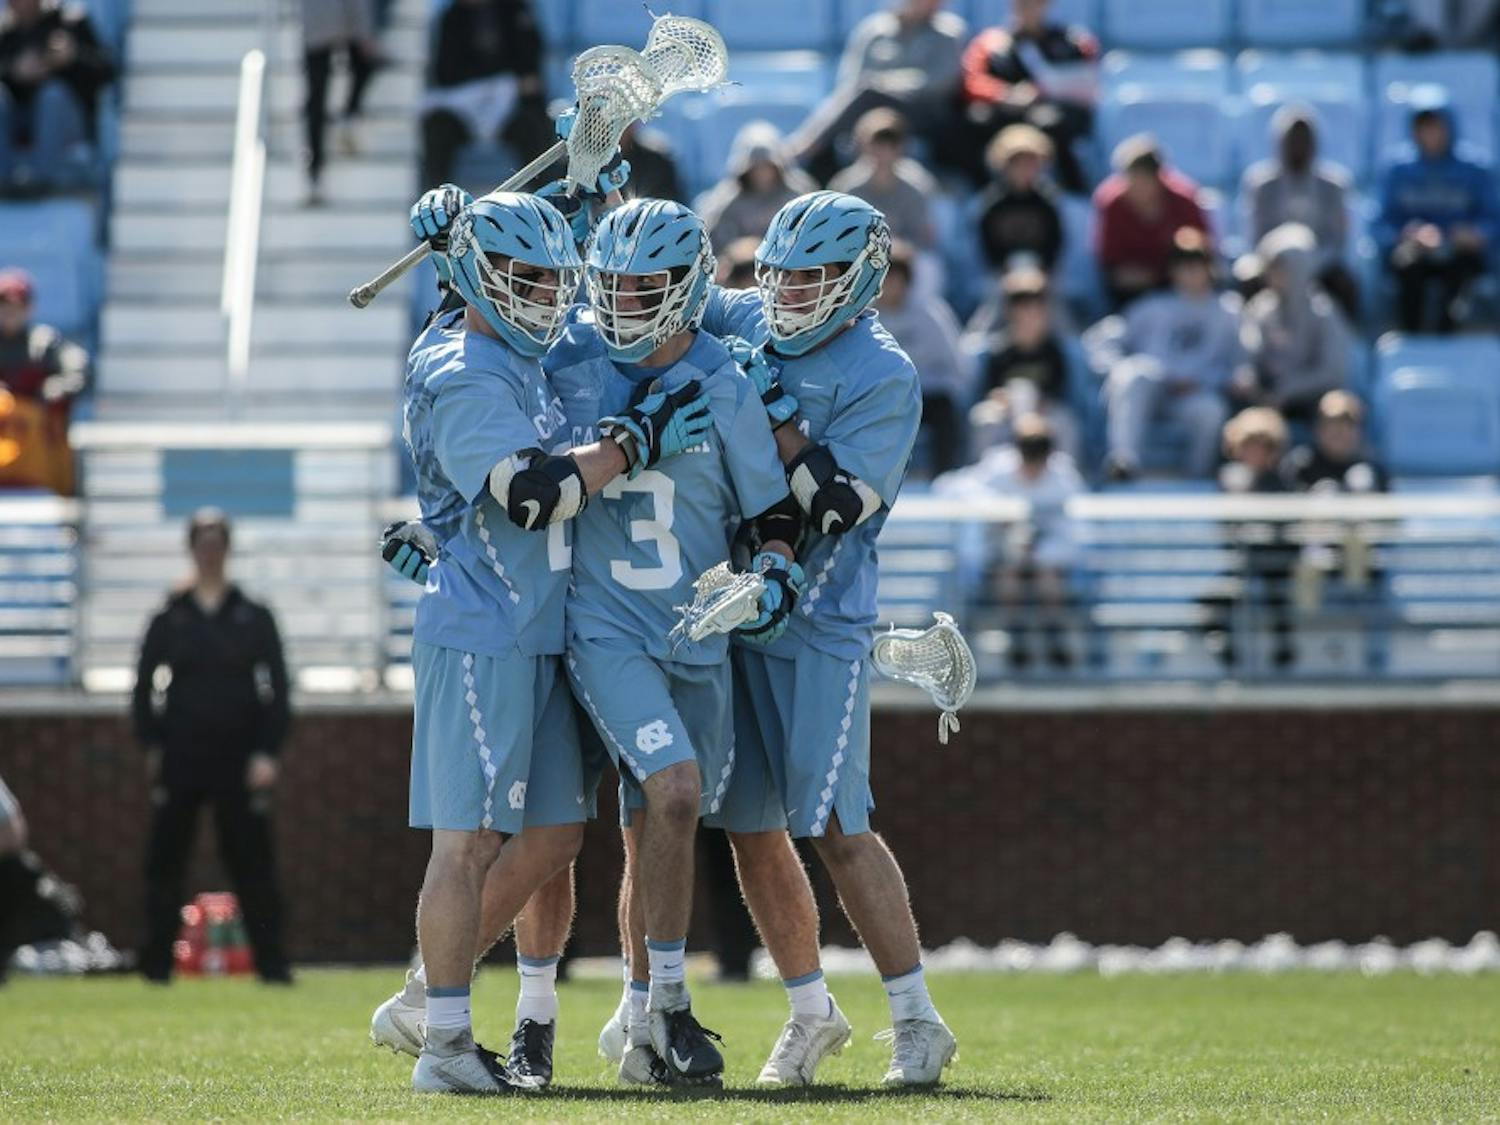 UNC junior midfielder William Perry (3) celebrates after scoring a goal with teammates Justin Anderson (21) and Andy Matthews (12) during UNC's 12-10 home loss against the University of Denver on Saturday, March 3, 2019 at the UNC Soccer and Lacrosse Stadium in Chapel Hill, N.C. This was the UNC Men's Lacrosse team's inaugural game at the UNC Soccer and Lacrosse Stadium.